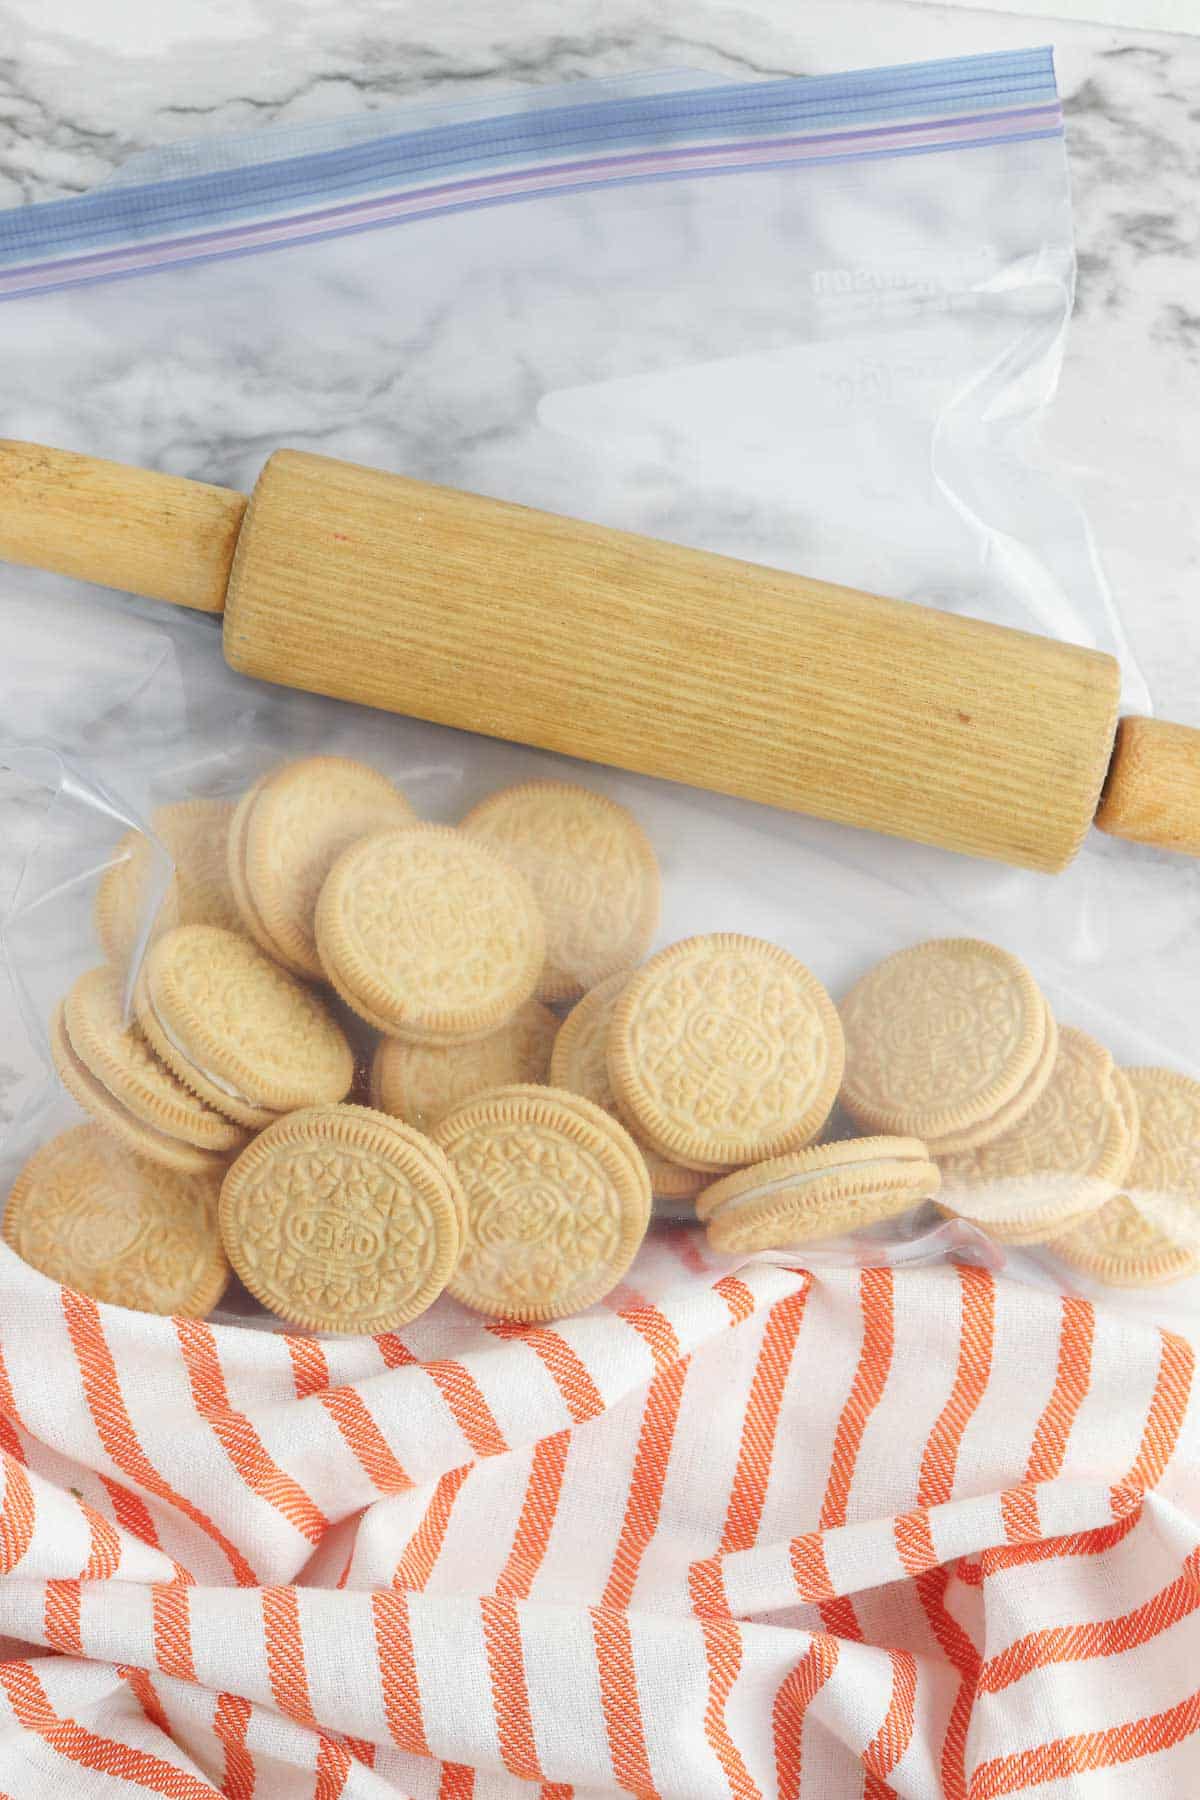 golden oreo cookies in a plastic bag with a rolling pin.